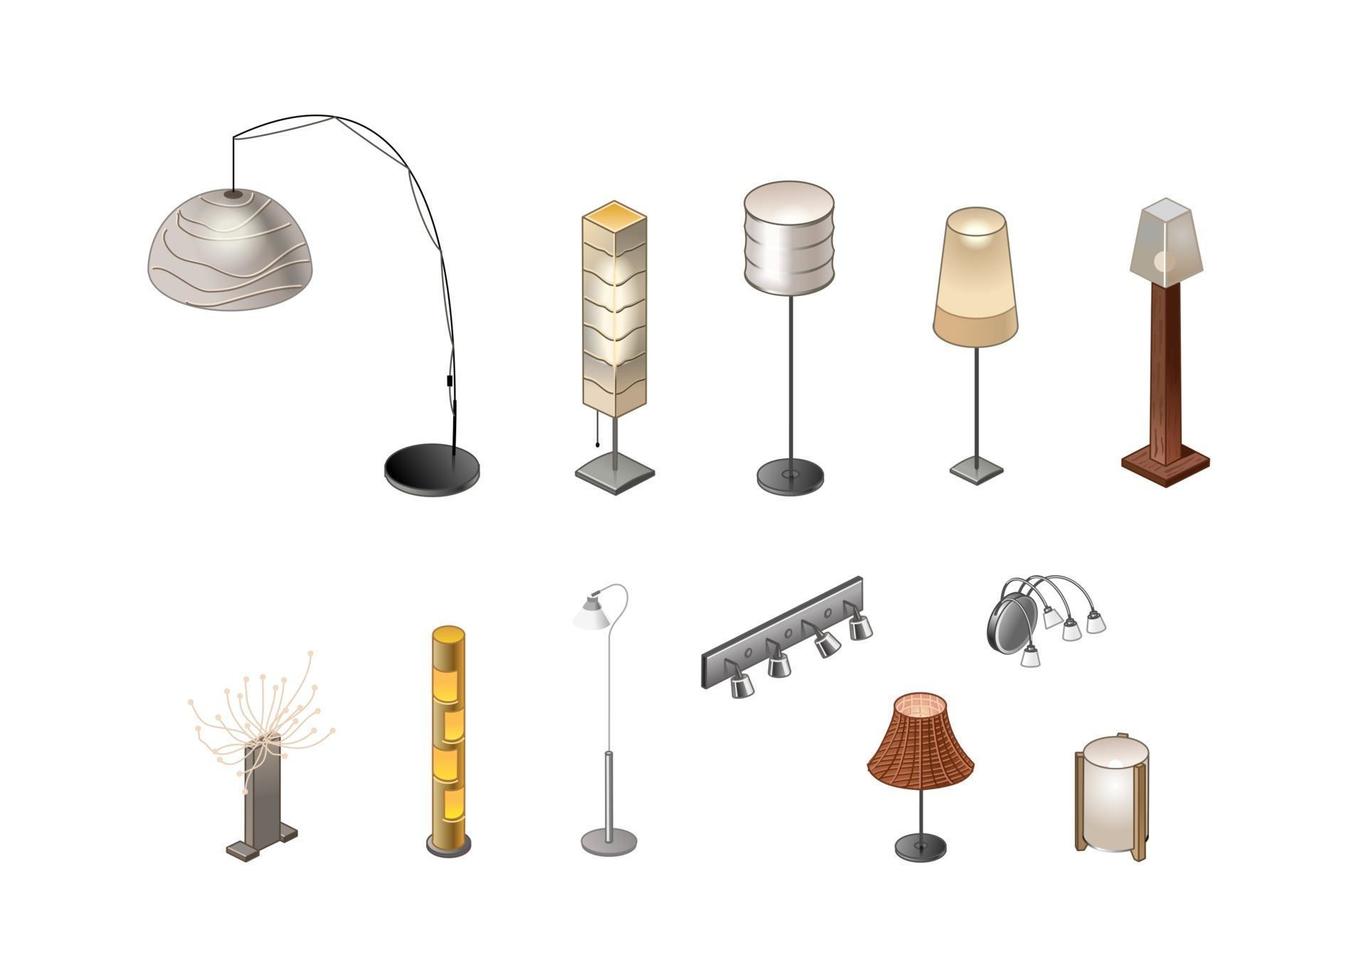 Lighting devices, floor lamps, lamps, lamps for the interior, floor and wall. Isometry Vector illustration